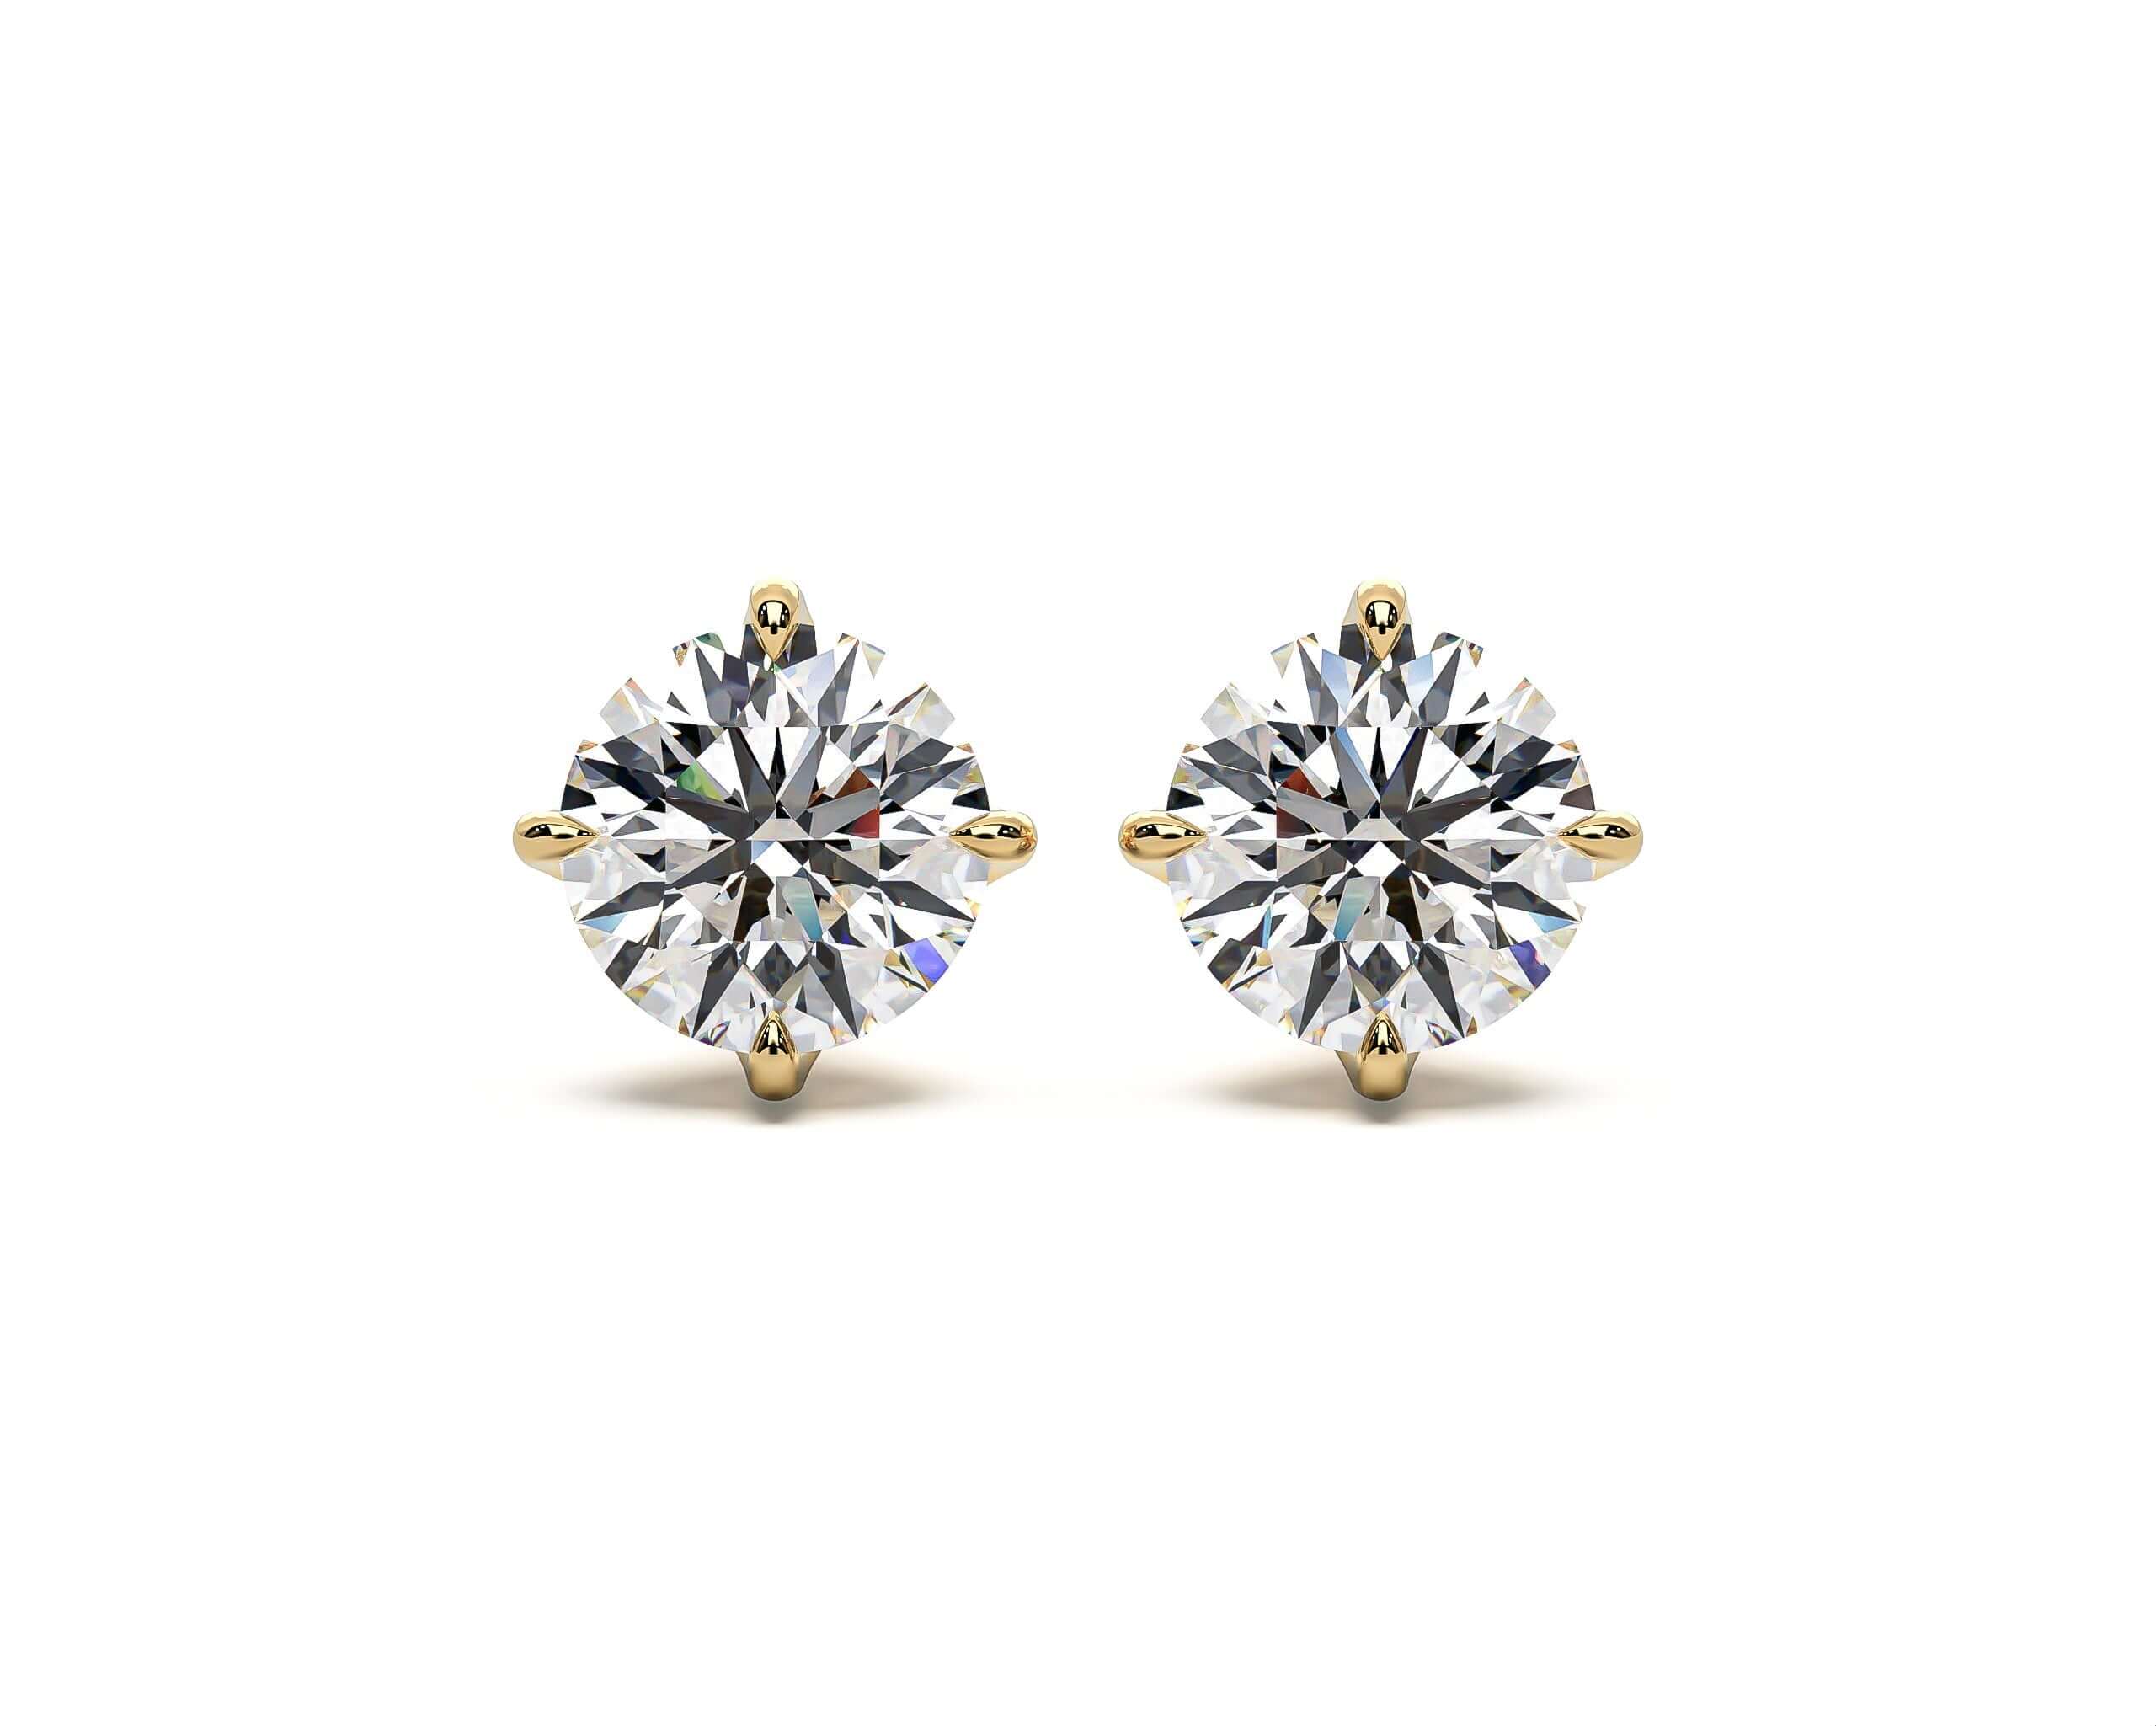 LAB LUXE - Round brilliant four claw Lab grown diamond earrings